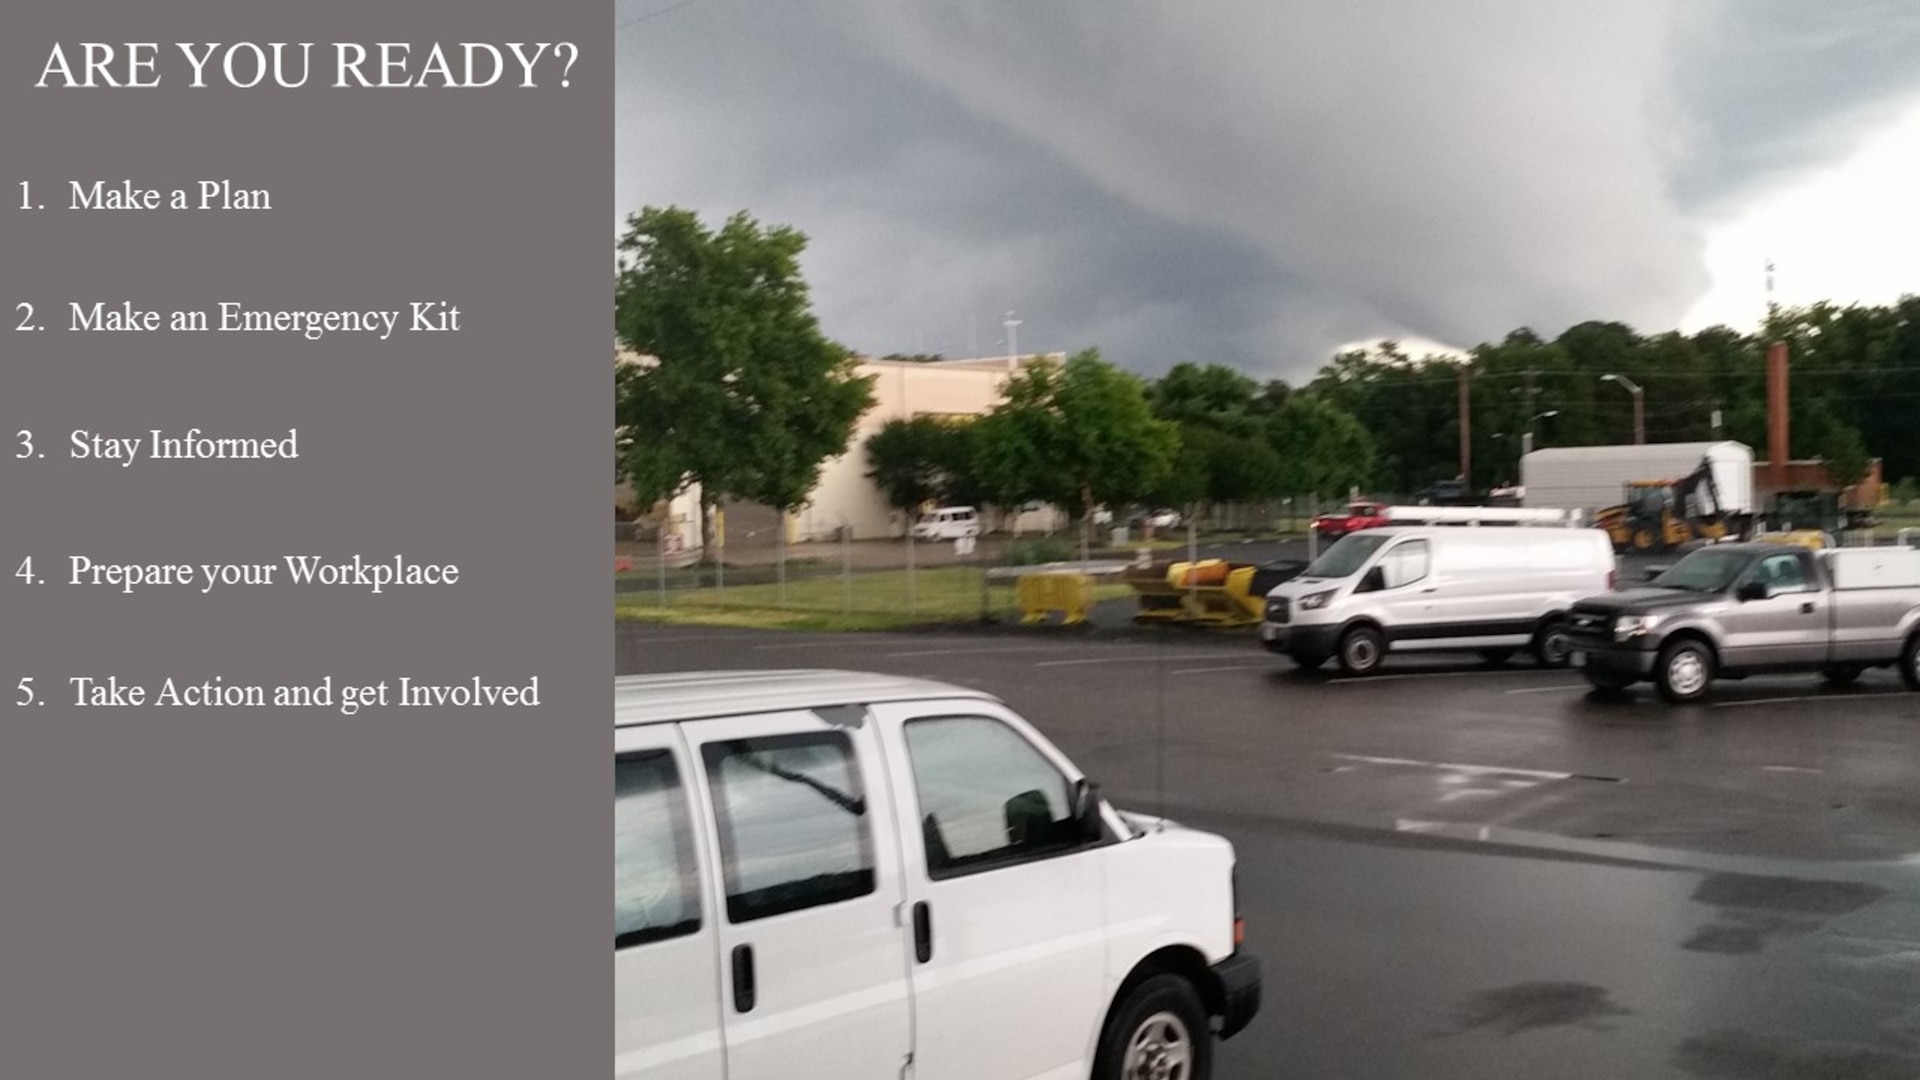 Storm clouds gather over Defense Supply Center Richmond, Virginia, earlier this year, highlighting the need to be prepared for unexpected weather and events.
